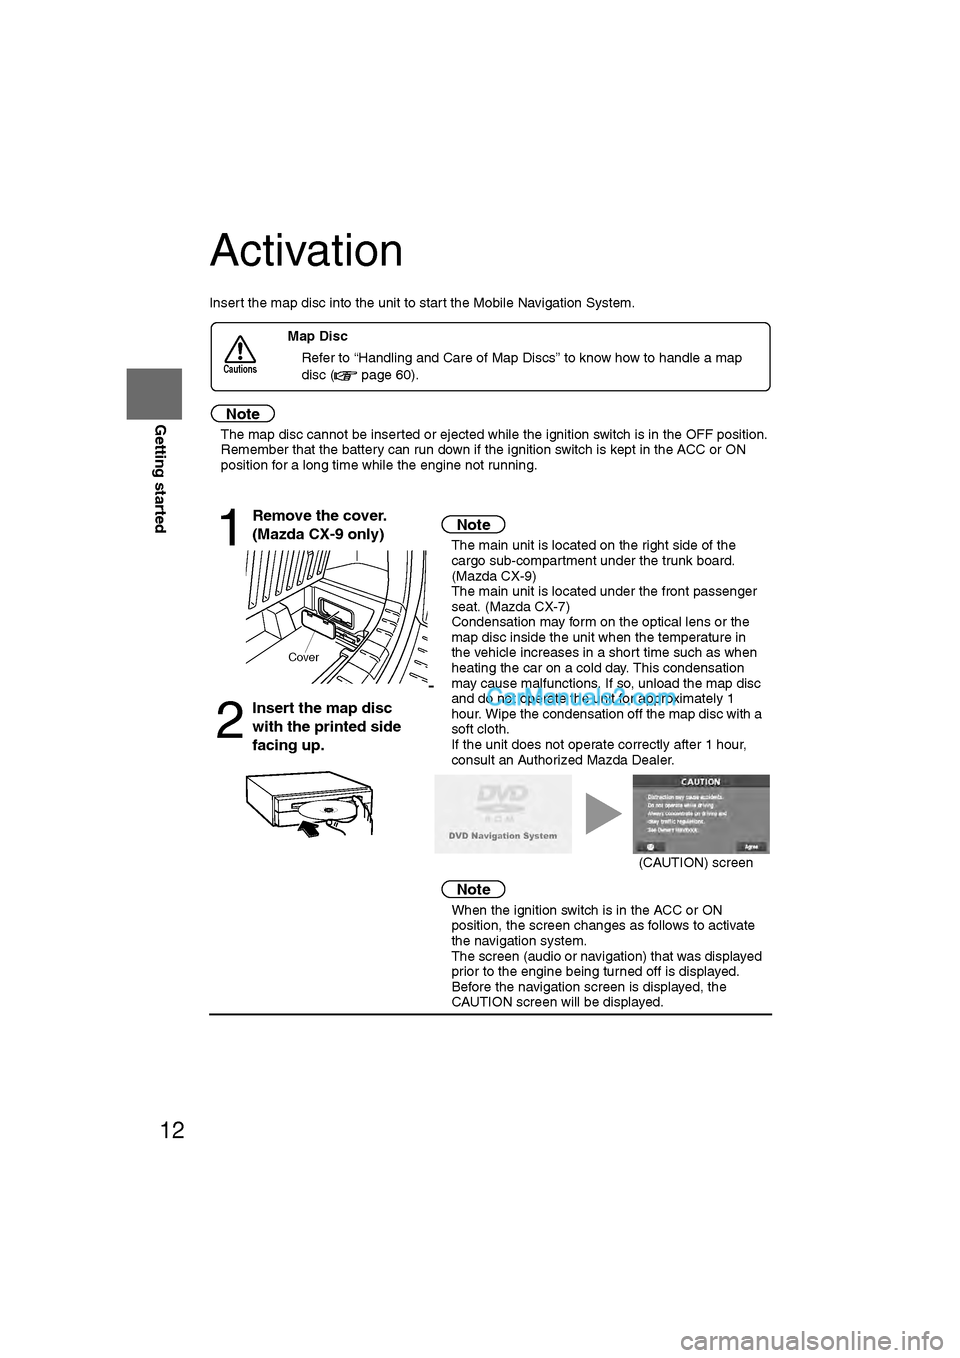 MAZDA MODEL CX-9 2008  Navigation Manual (in English) 12
RoutingAddress 
Book
Getting started
Activation
Insert the map disc into the unit to start the Mobile Navigation System.
Note
l
The map disc cannot be inserted or ejected while the ignition switch 